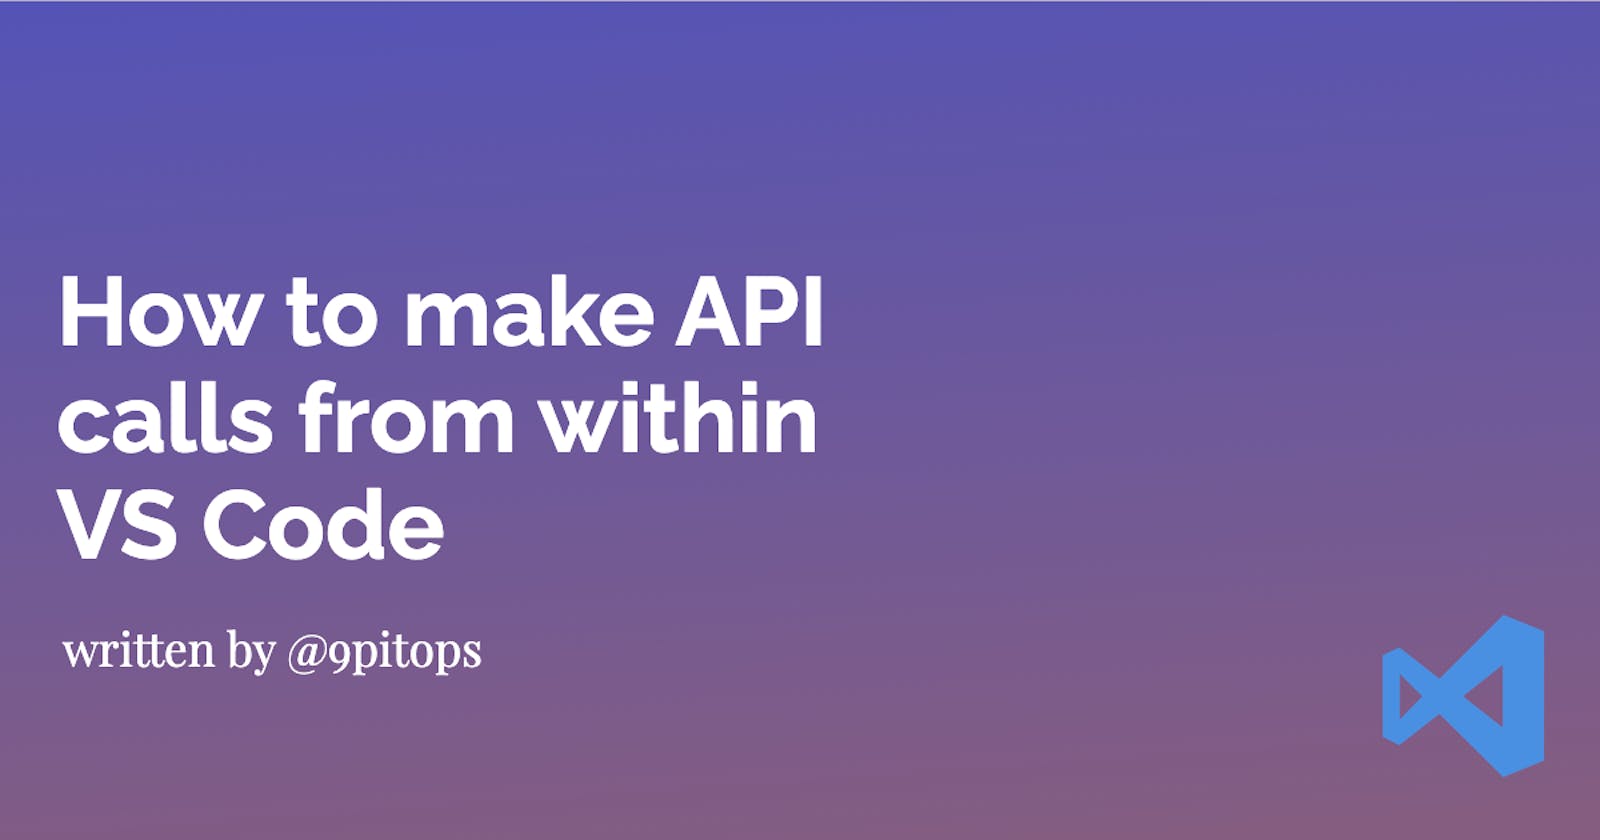 How to make API calls from within VS Code